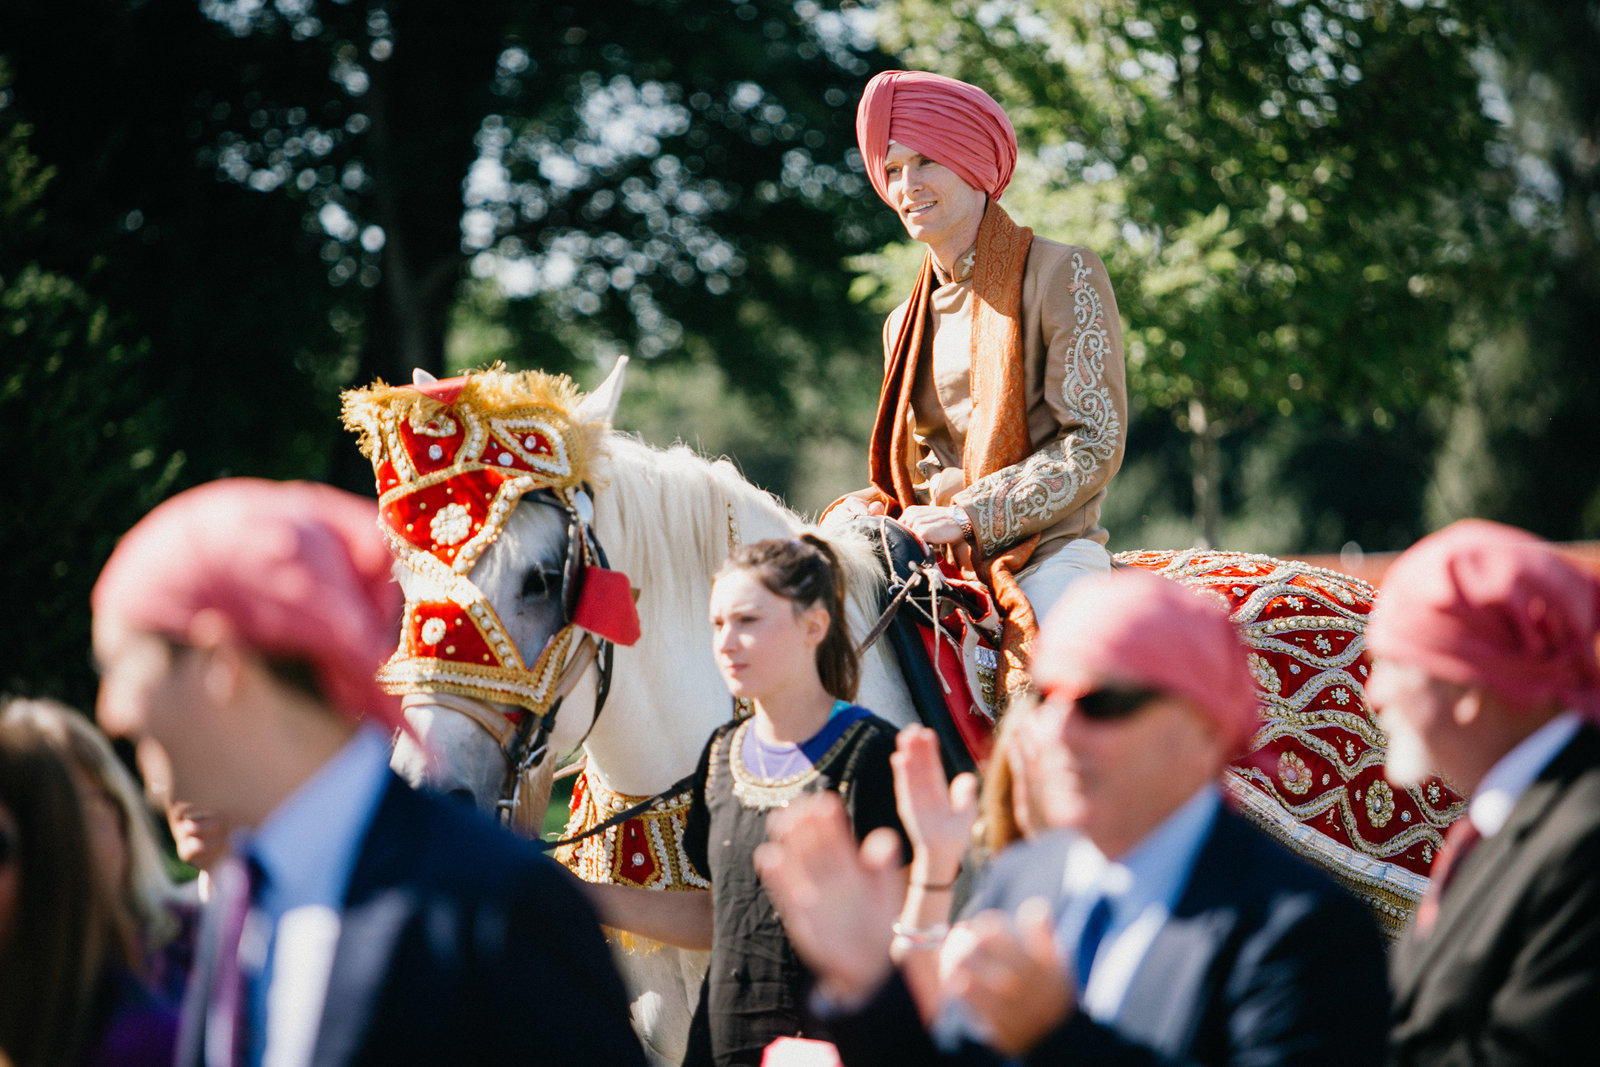 Groom photographed on a horse for the Indian part of the wedding ceremony during their two day wedding celebration.